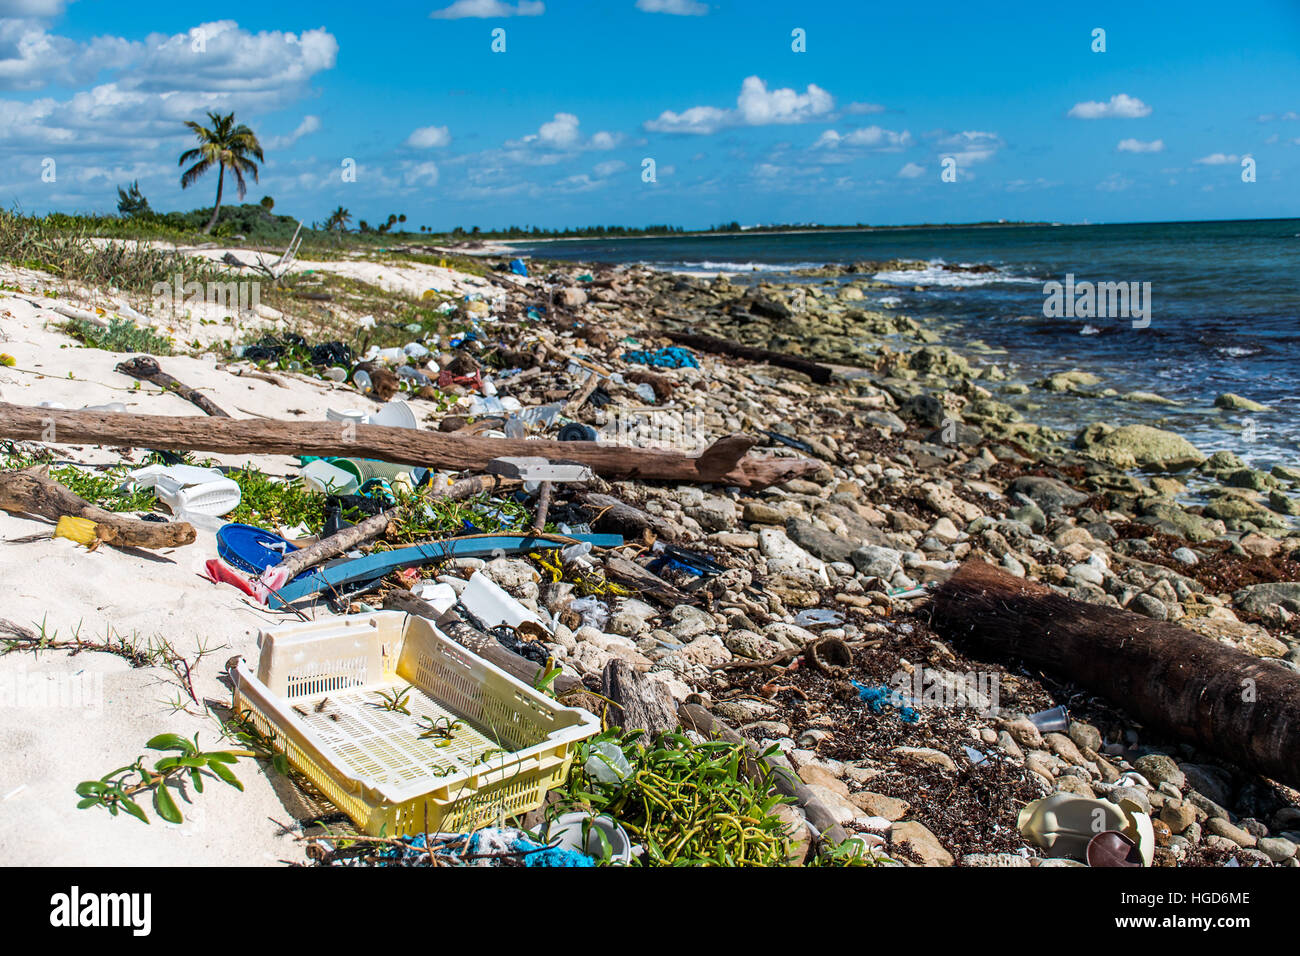 Mexico Coastline ocean Pollution Problem with plastic litter 3 Stock Photo